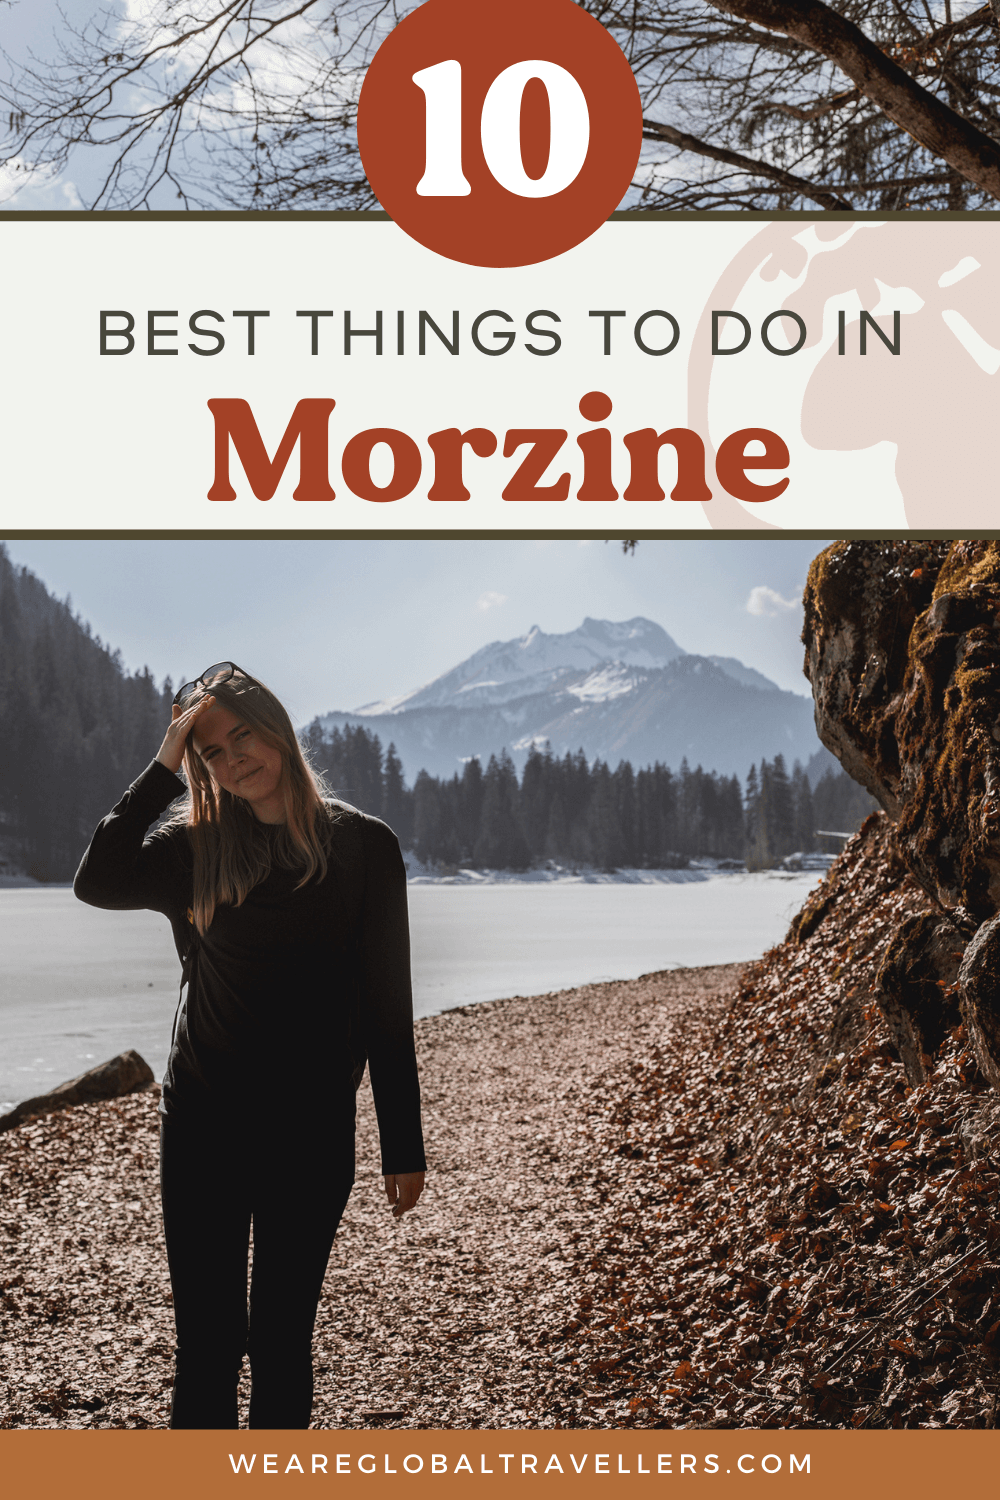 The best things to do in Morzine, France